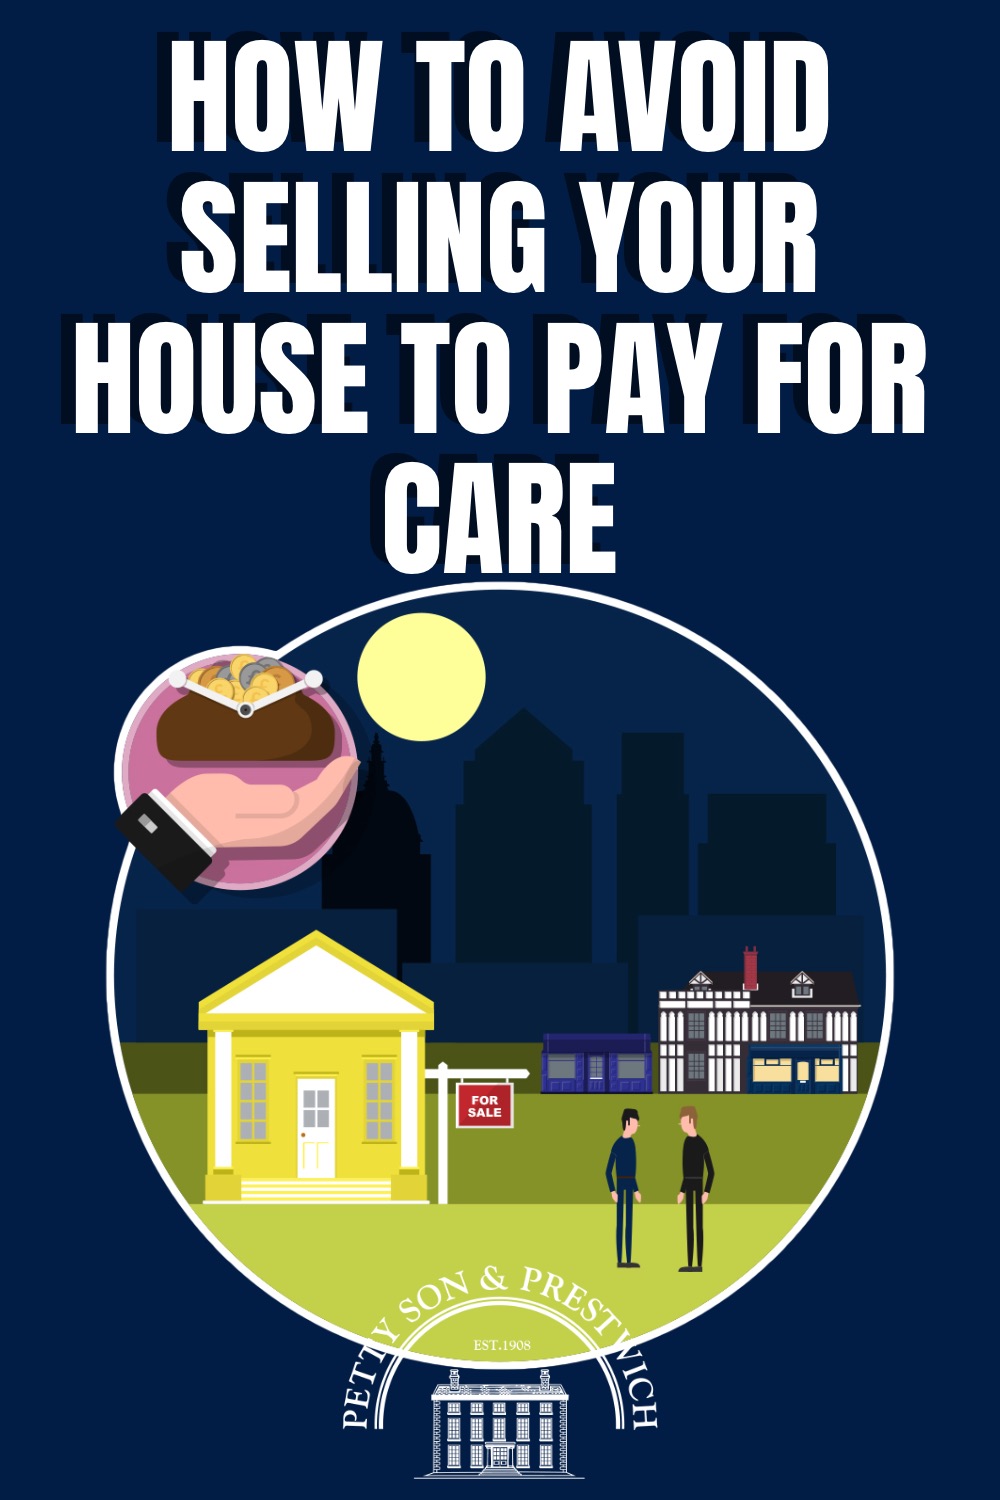 how to avoid selling house to pay for care